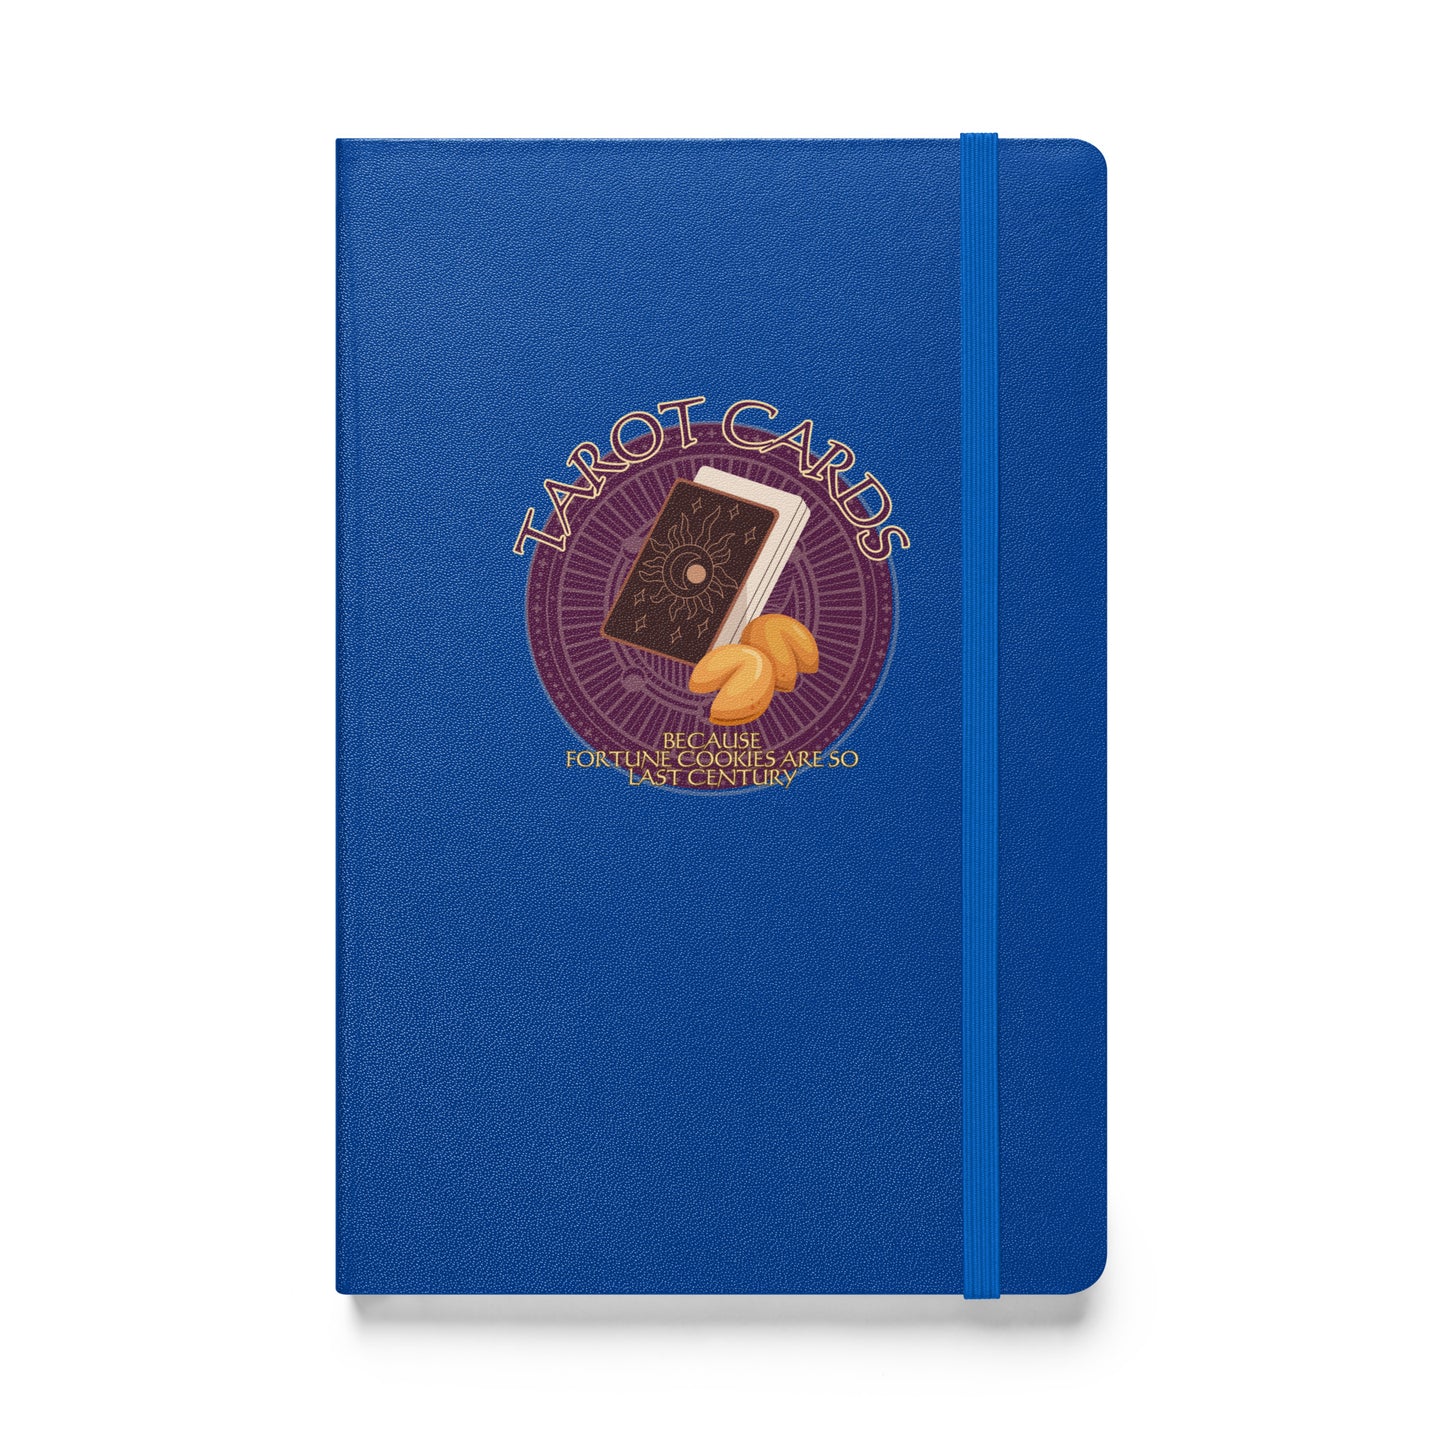 Tarot Cards Because Fortune Cookies Are So Last Century Hardcover bound notebook